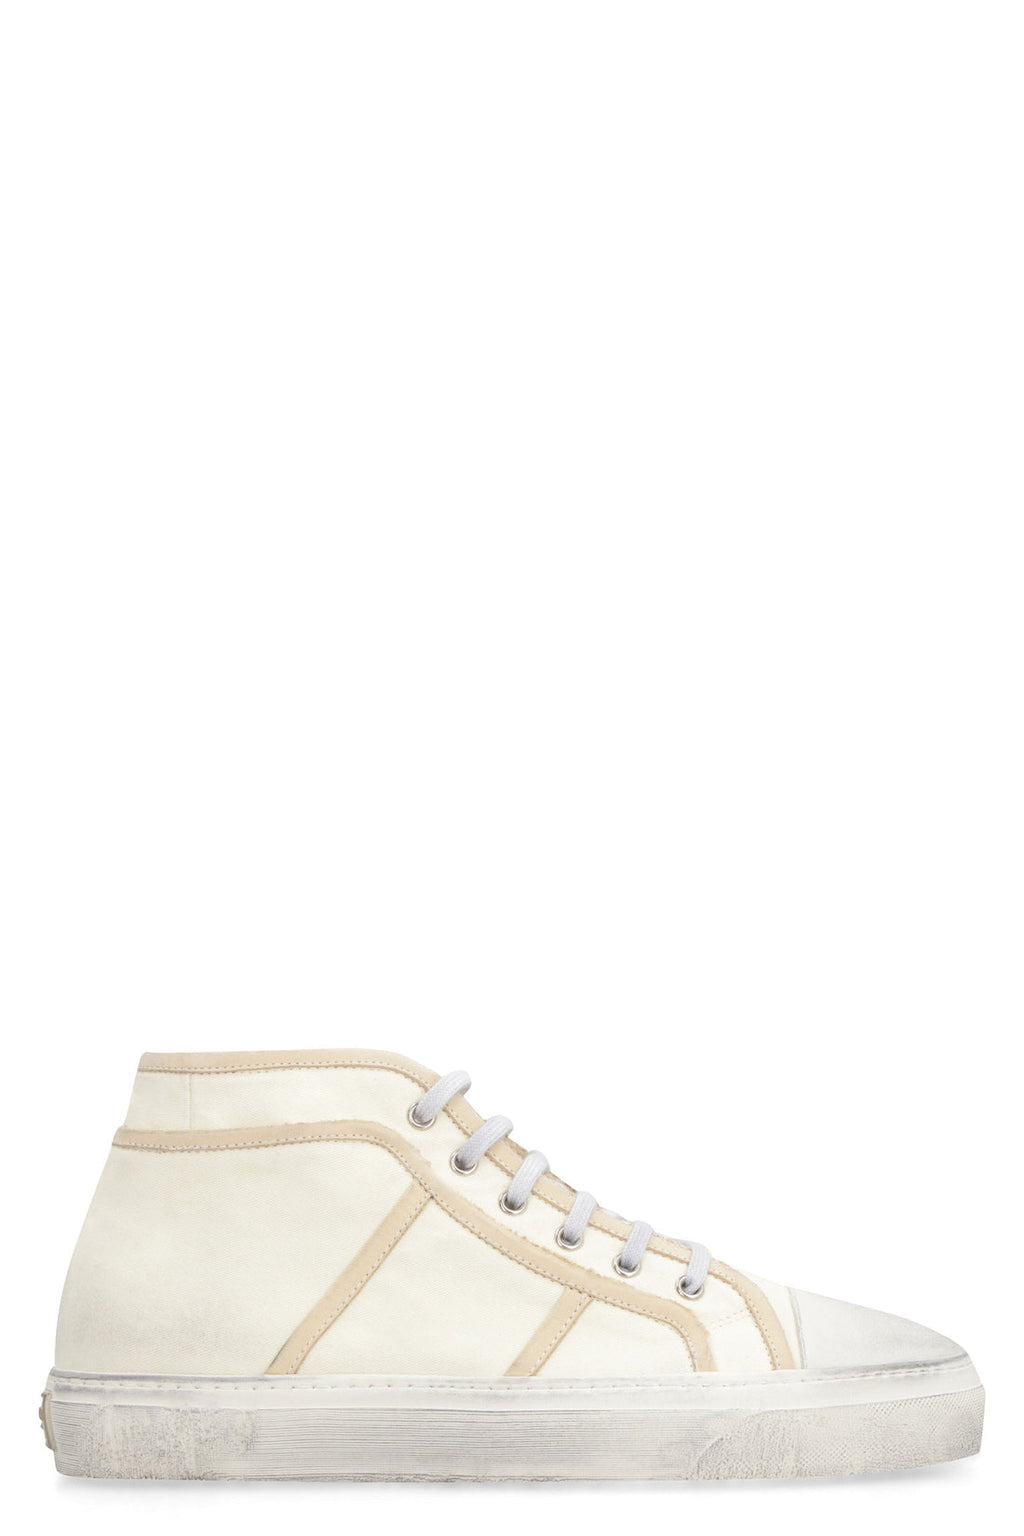 Dolce & Gabbana-OUTLET-SALE-Canvas mid-top sneakers-ARCHIVIST